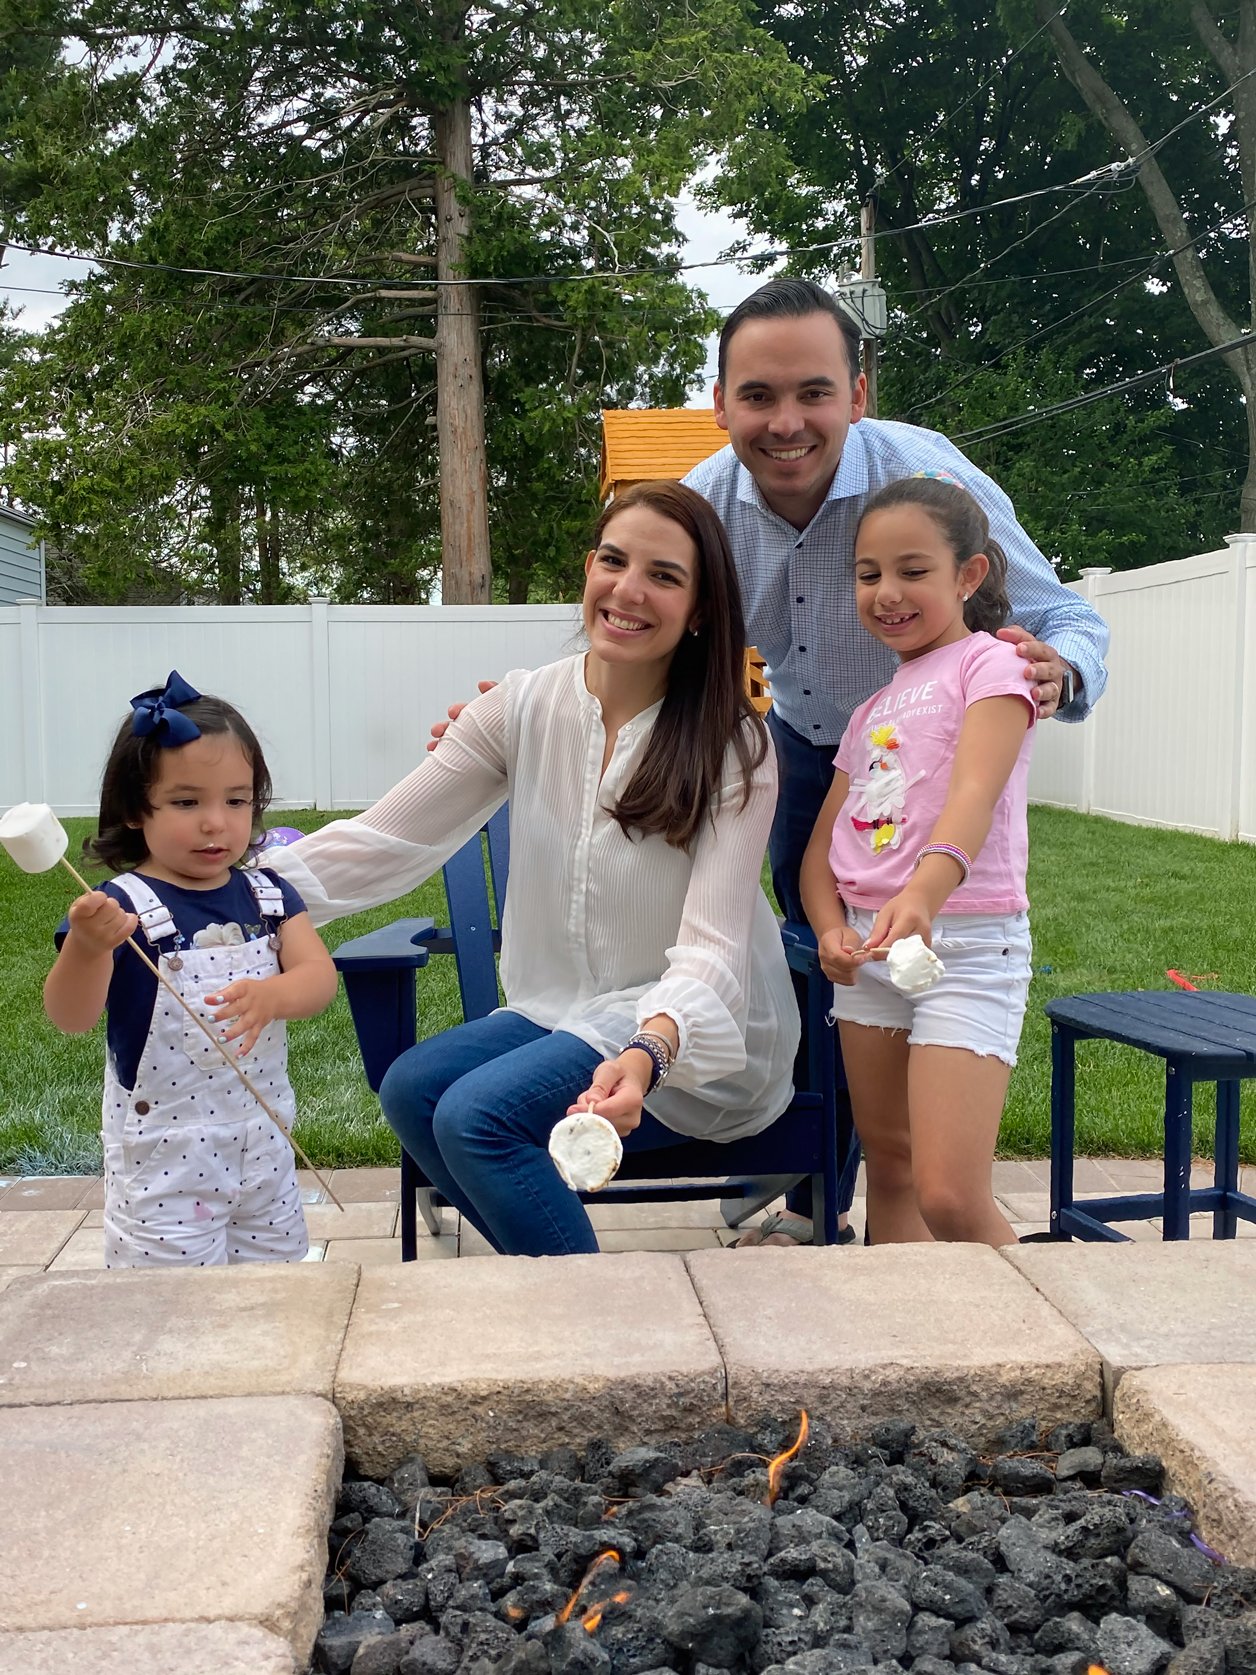 Carmen and her family roast marshmallows at home, weeks after her surgery.